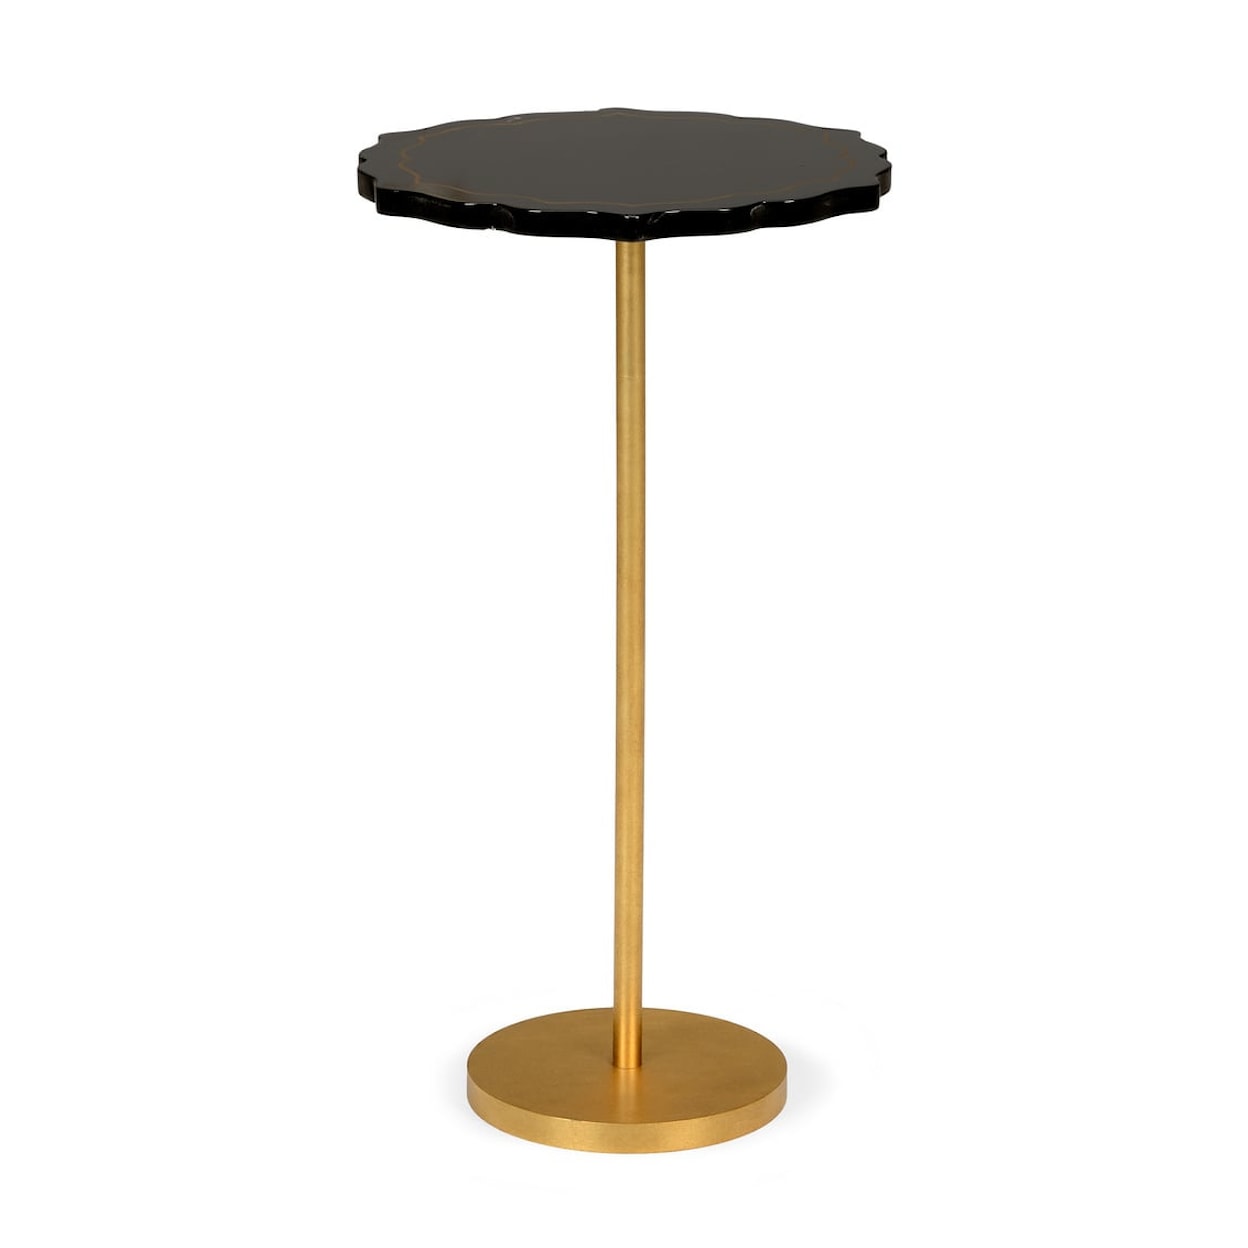 Chelsea House Tables - Accent & Side BLACK SIDE TABLE